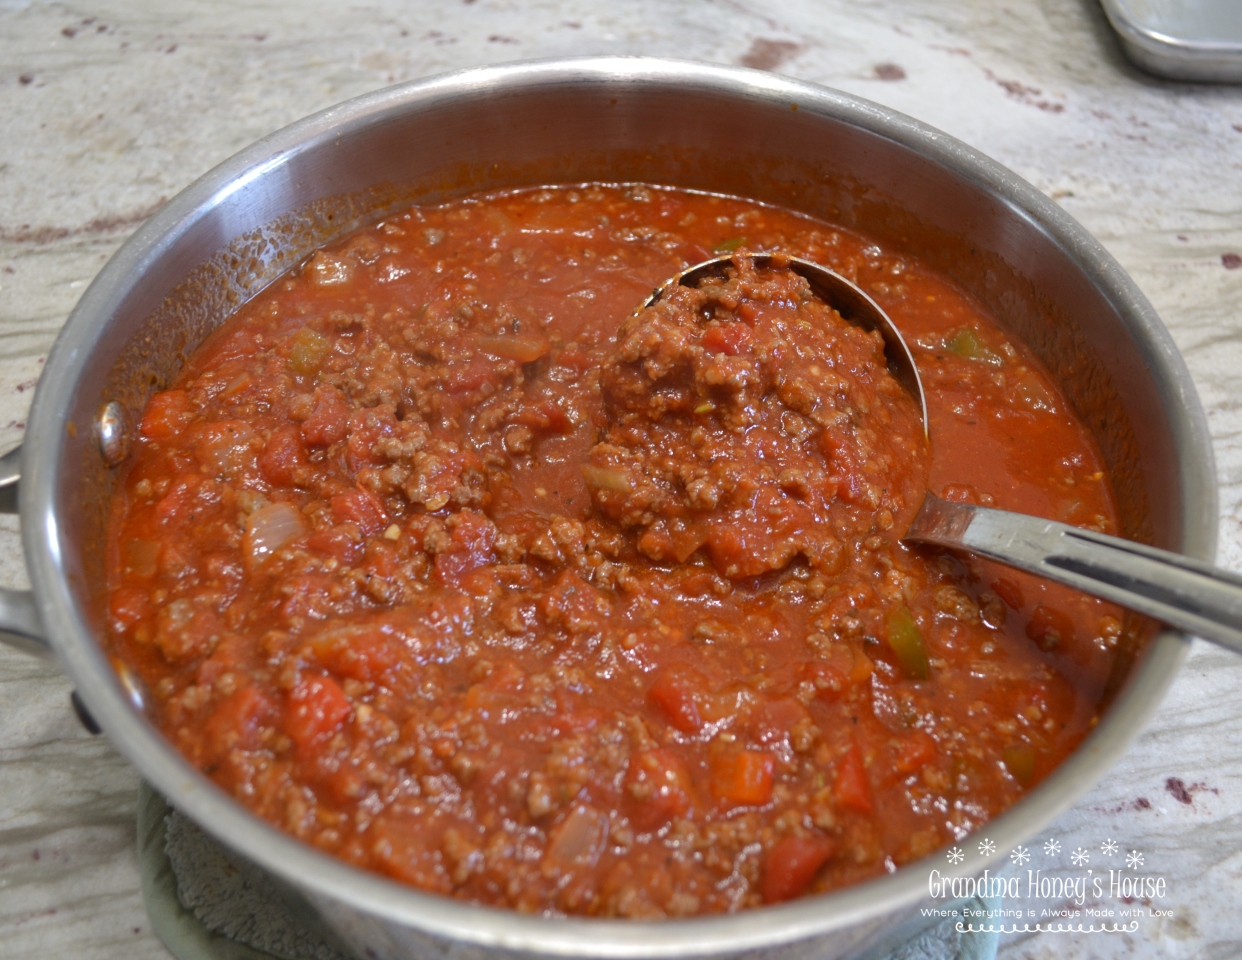 A thick meaty, sauce with sweet italian sausage, ground beef, onions, peppers, garlic, tomatoes, seasonings, and jarred pasta sauces.  